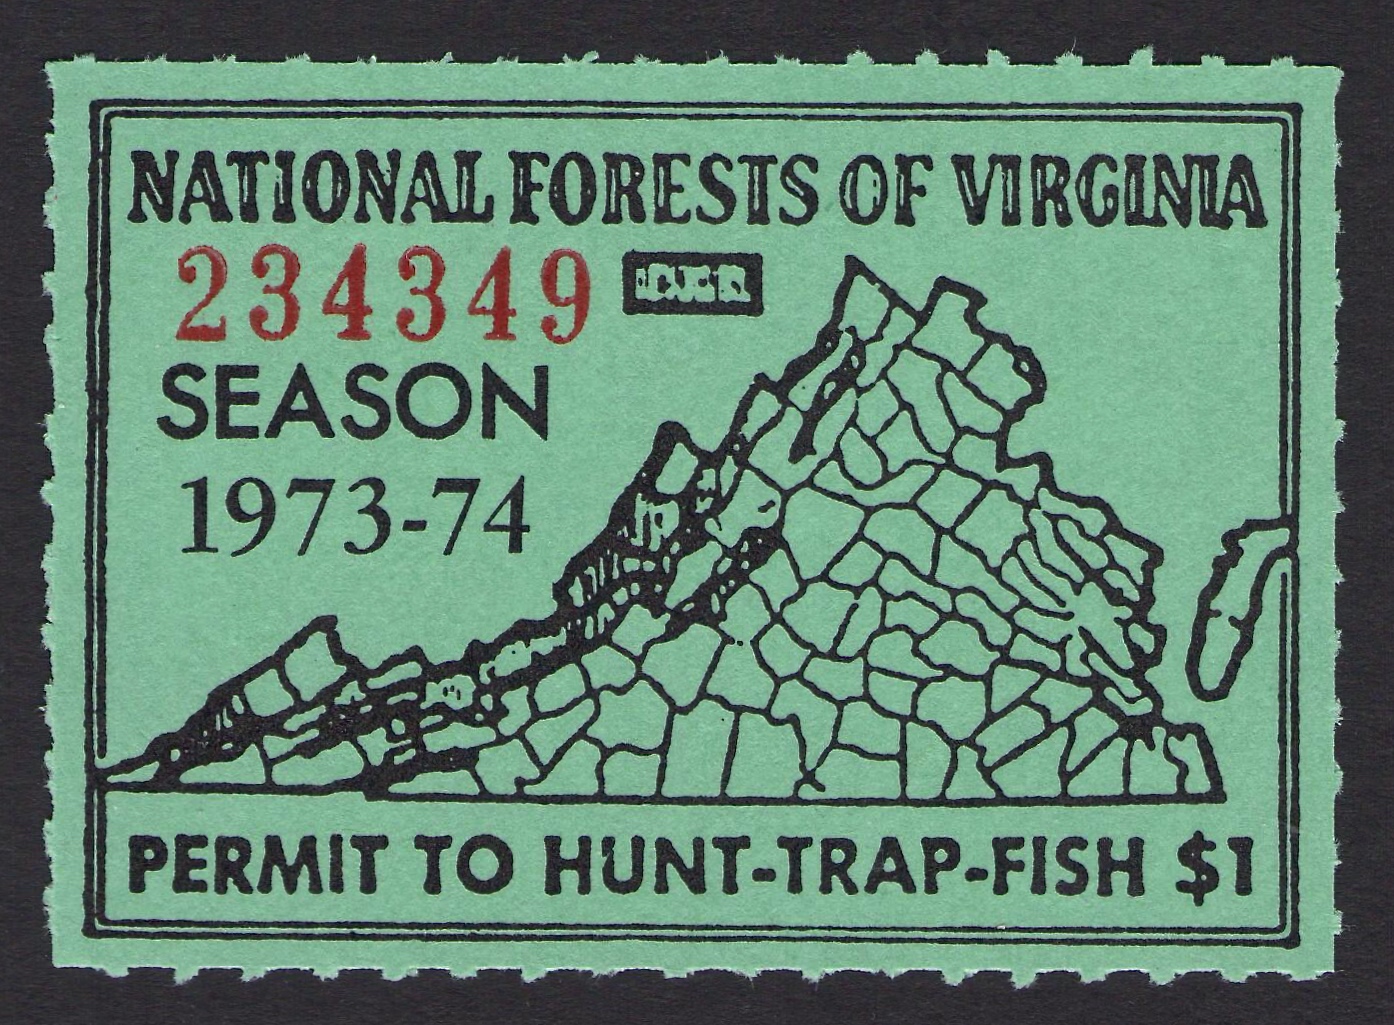 1973-74 National Forest Virginia